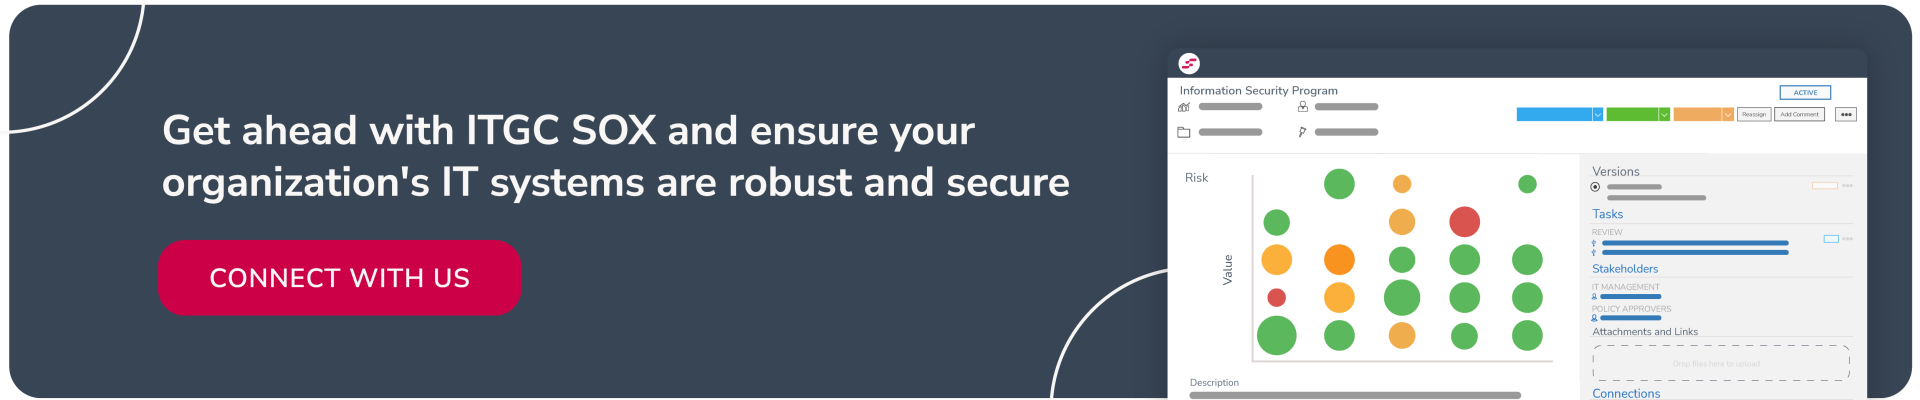 Get ahead with ITGC SOX and ensure your organization's IT systems are robust and secure